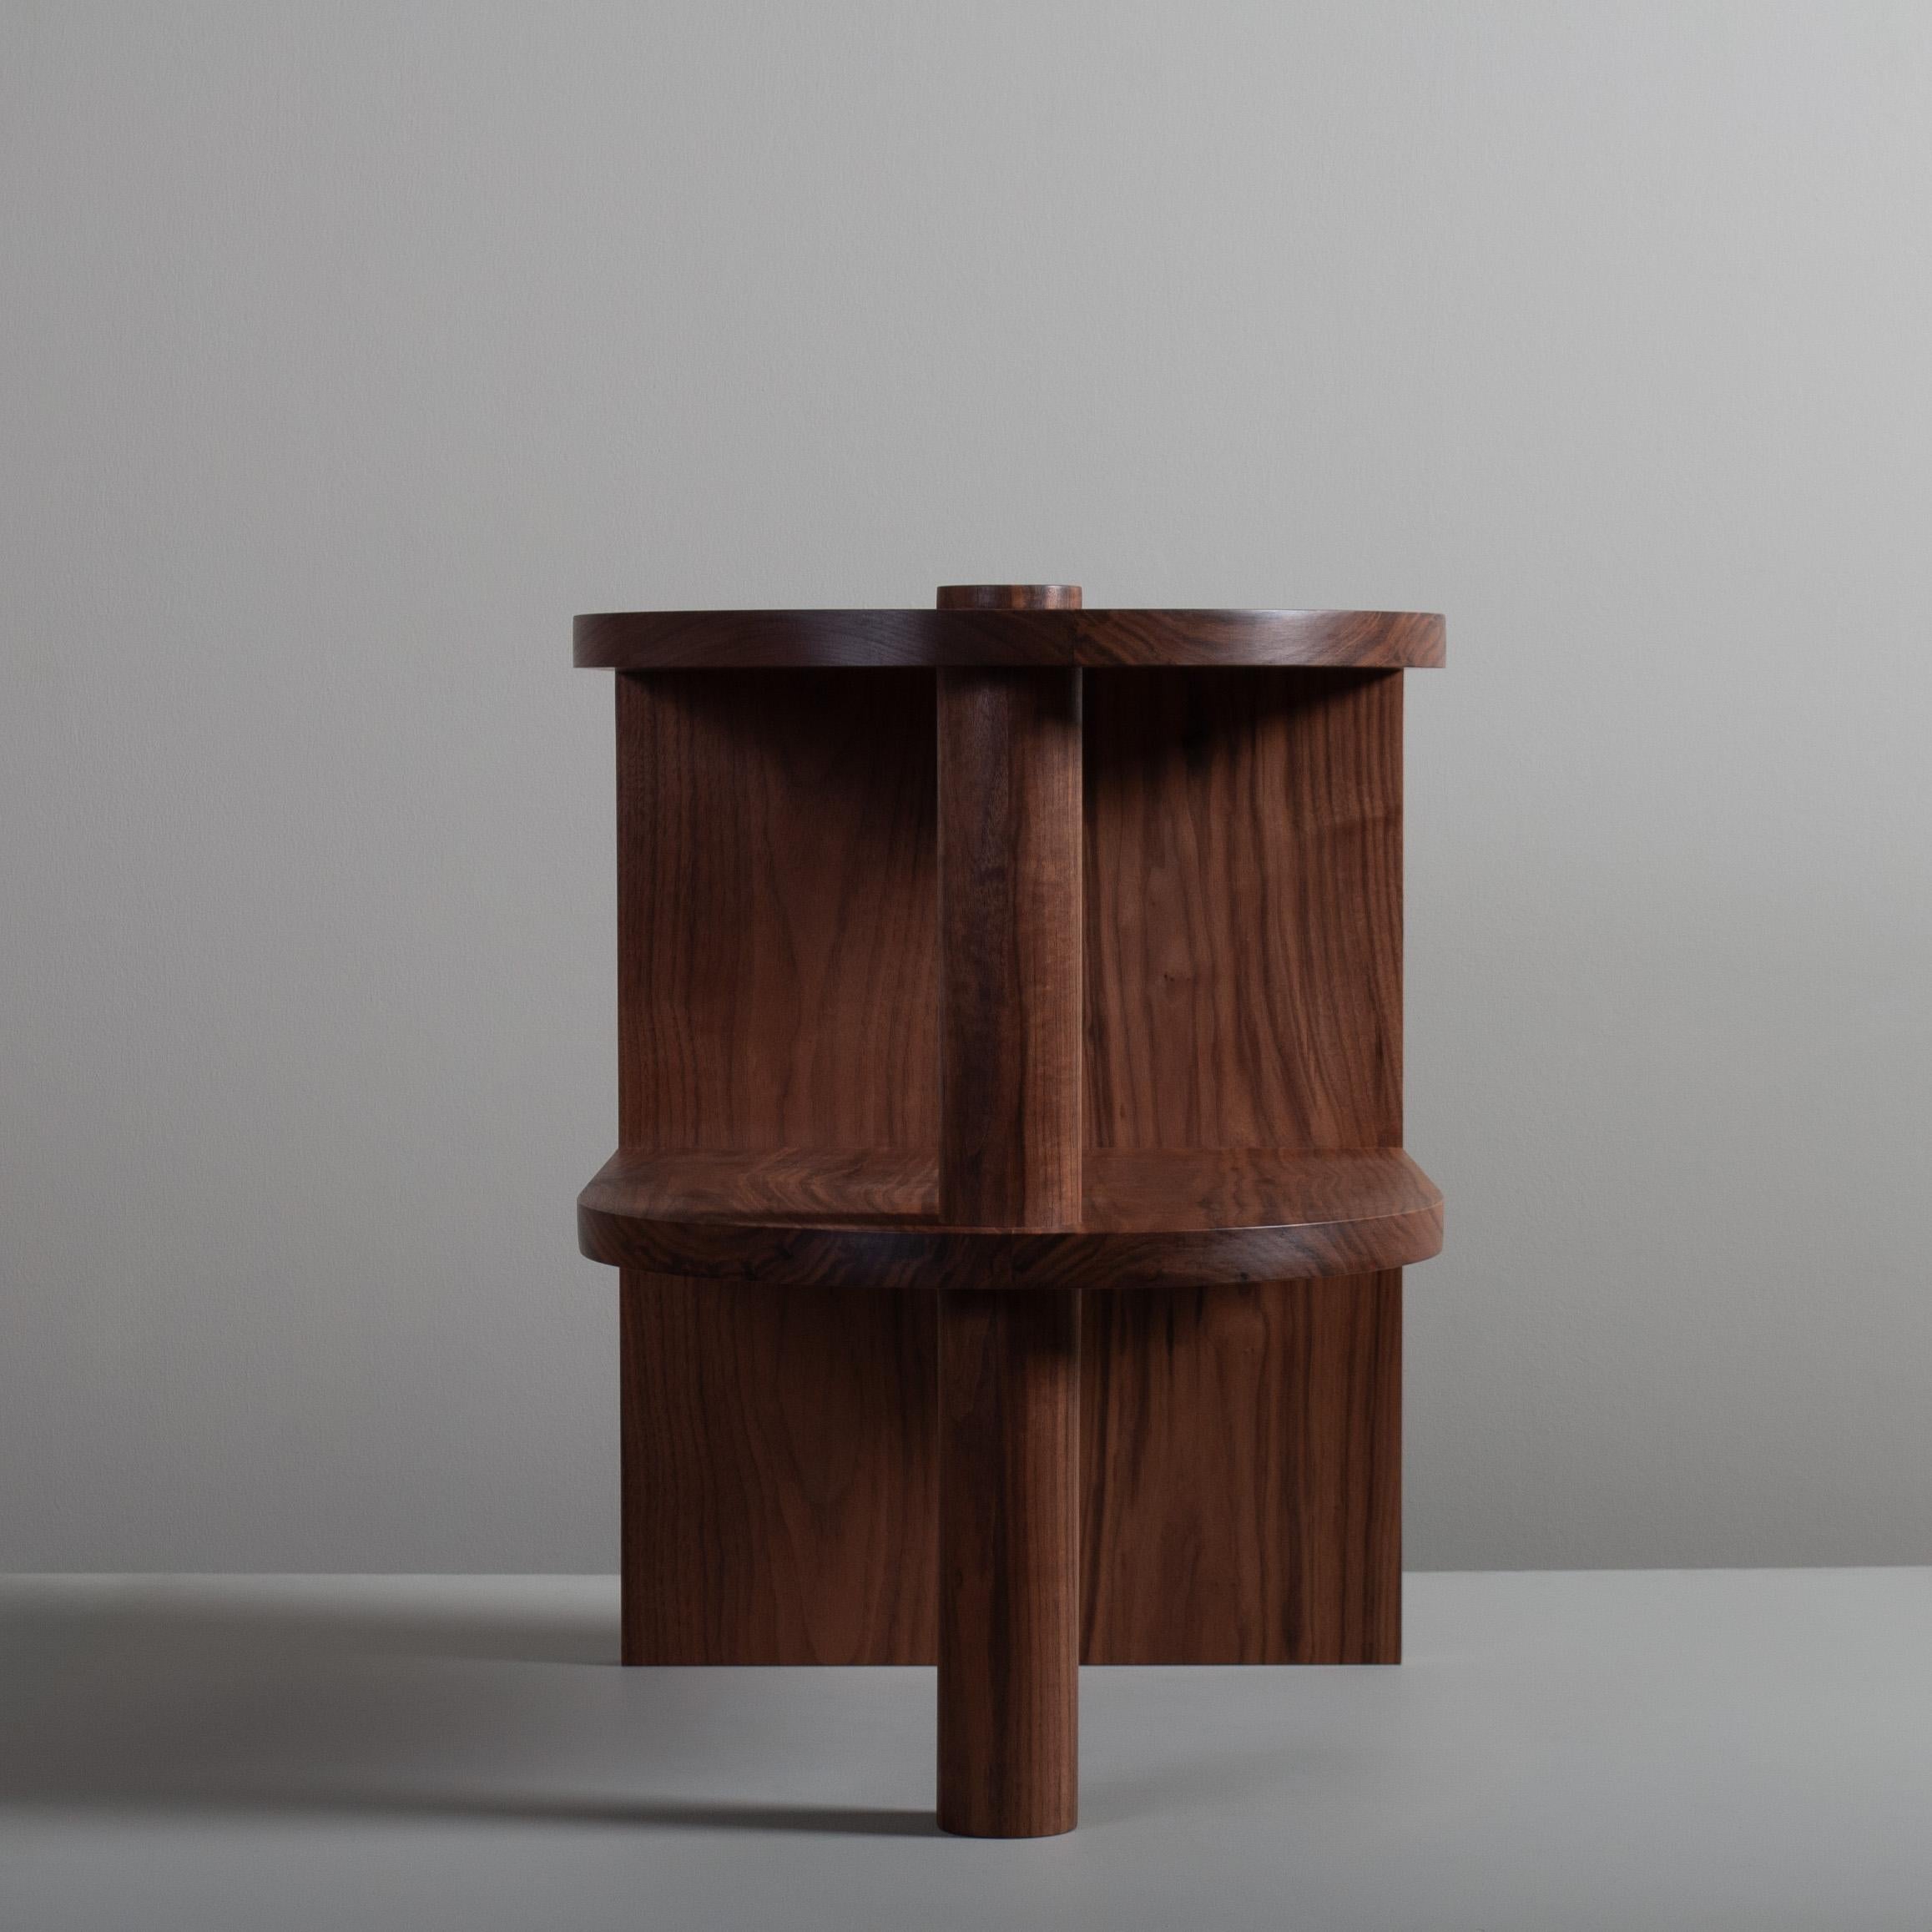 Architectural postmodern/Art Deco American black walnut pillar end or side table. Design by Sum furniture and handcrafted in England using traditional techniques using the finest American Black Walnut. Hand-cut large dovetail jointing with turned